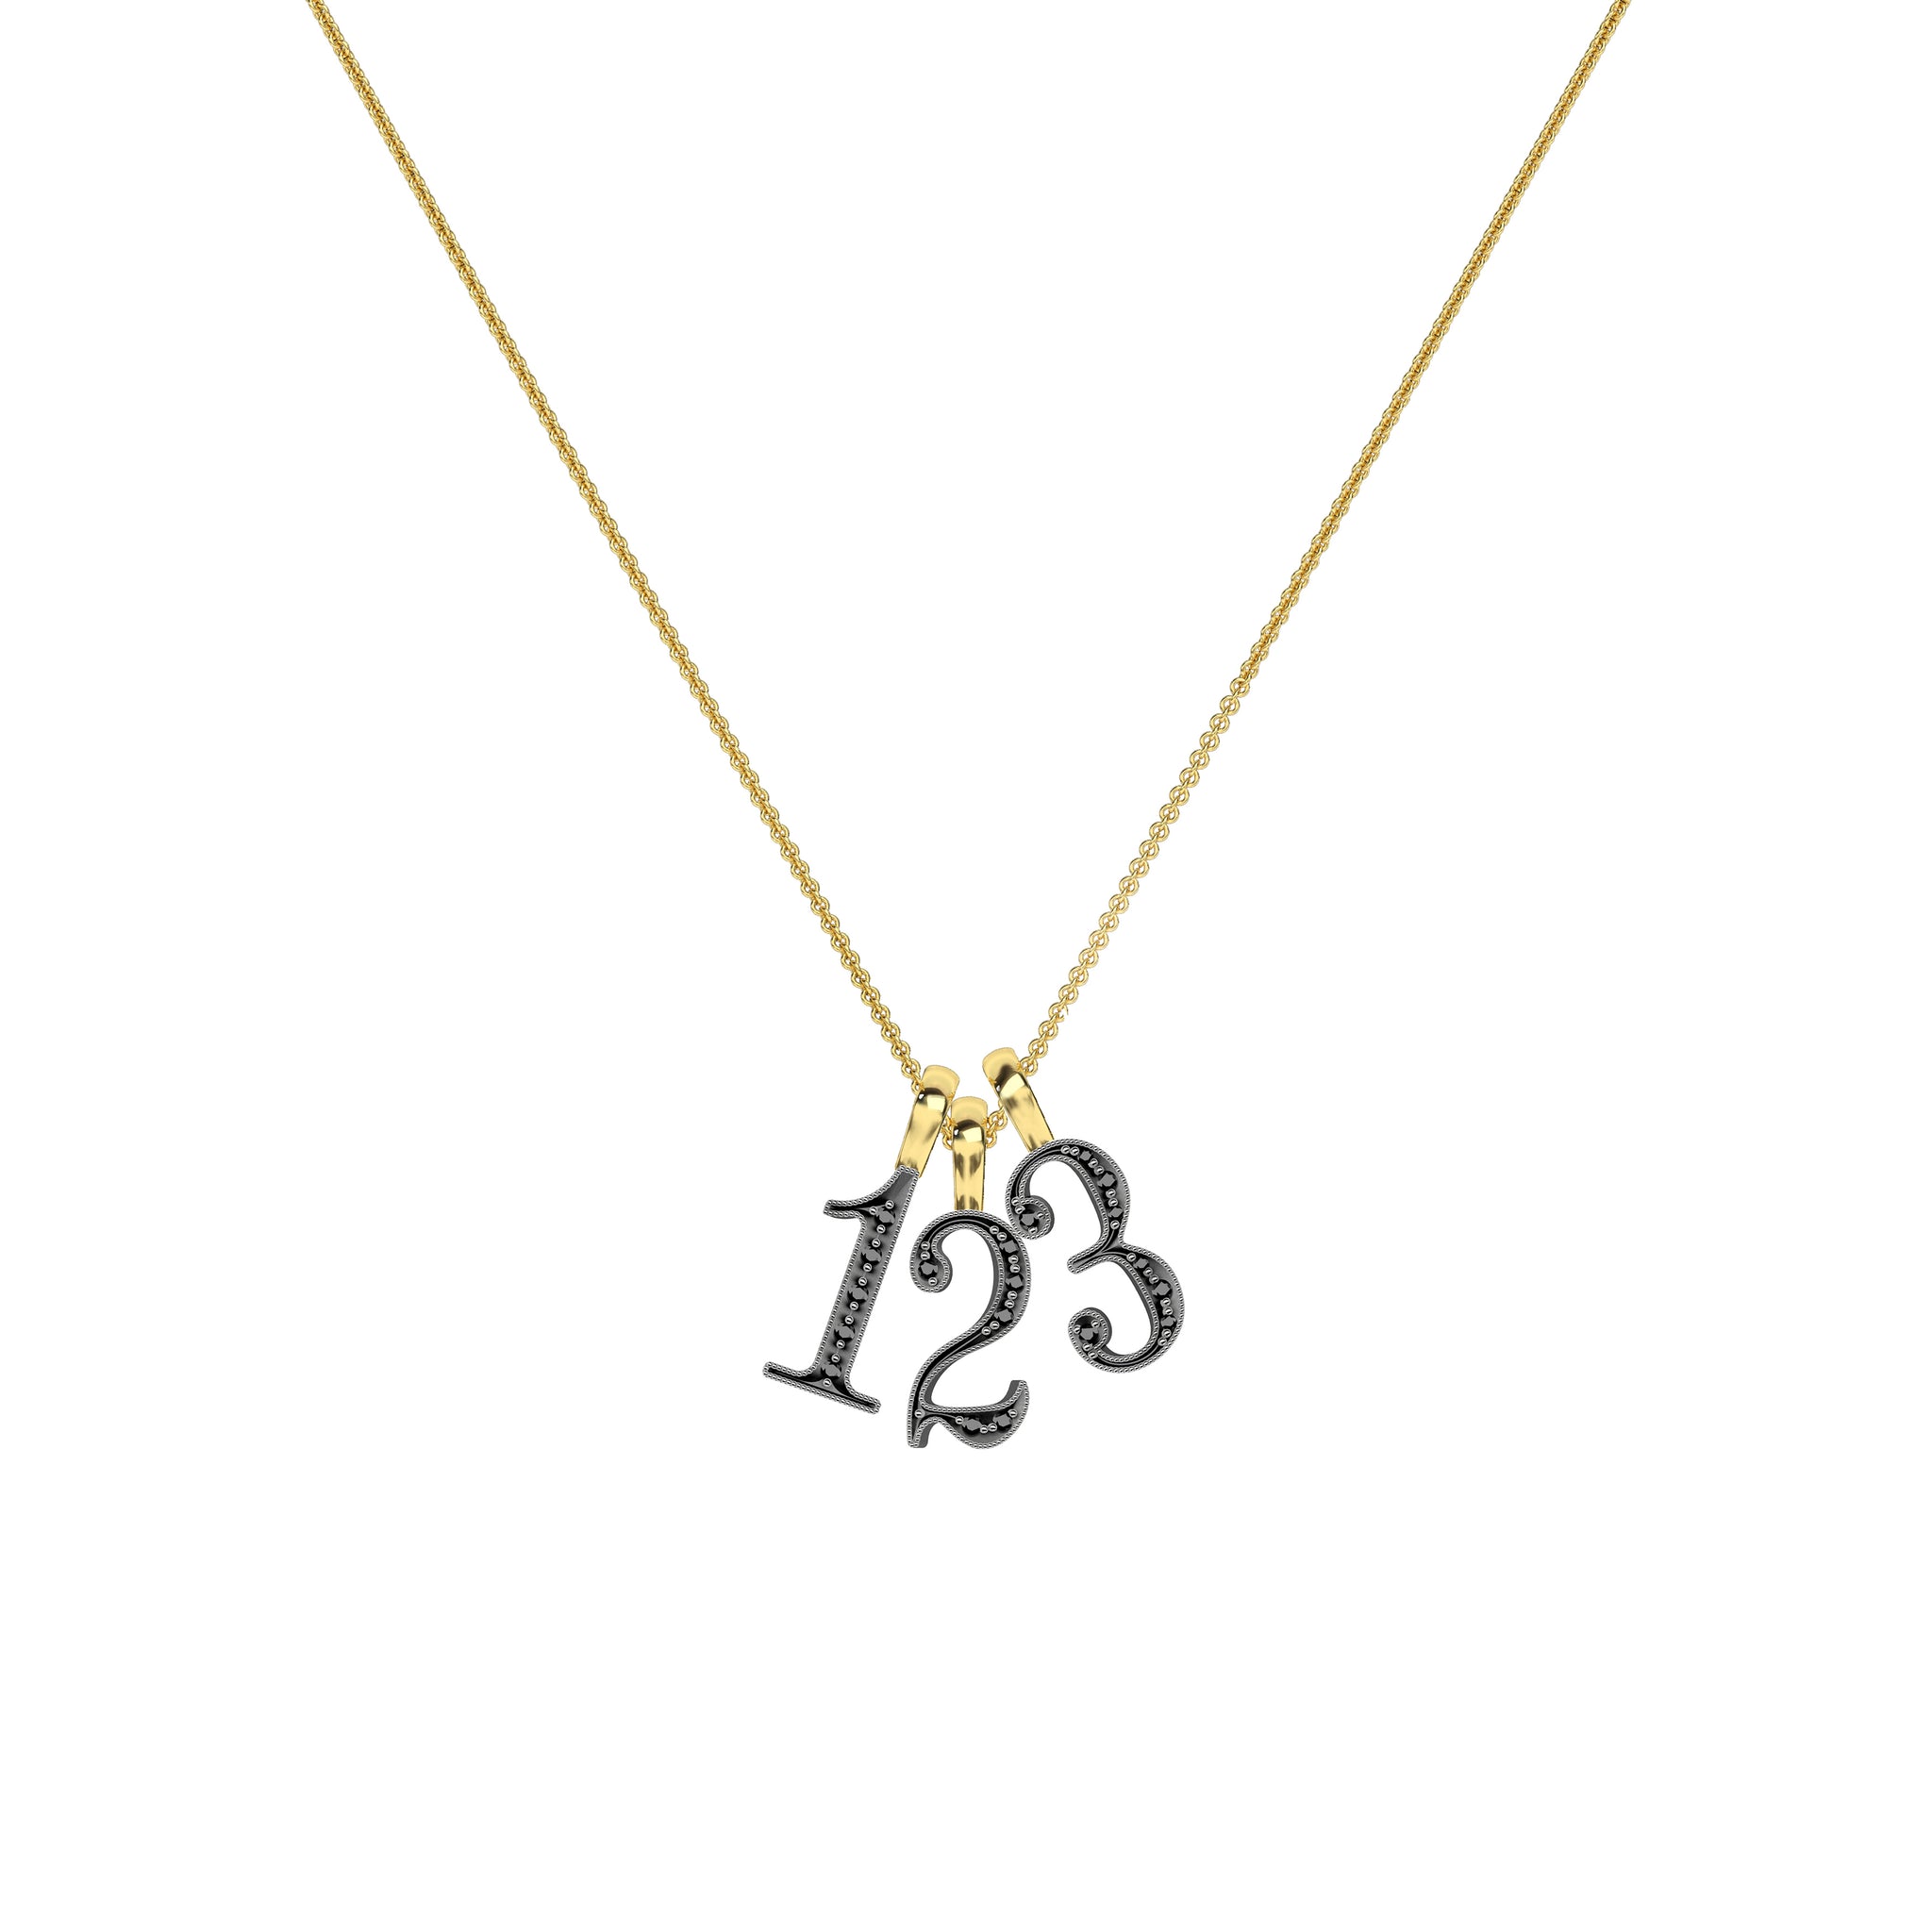 Lucky Number 7 Necklace